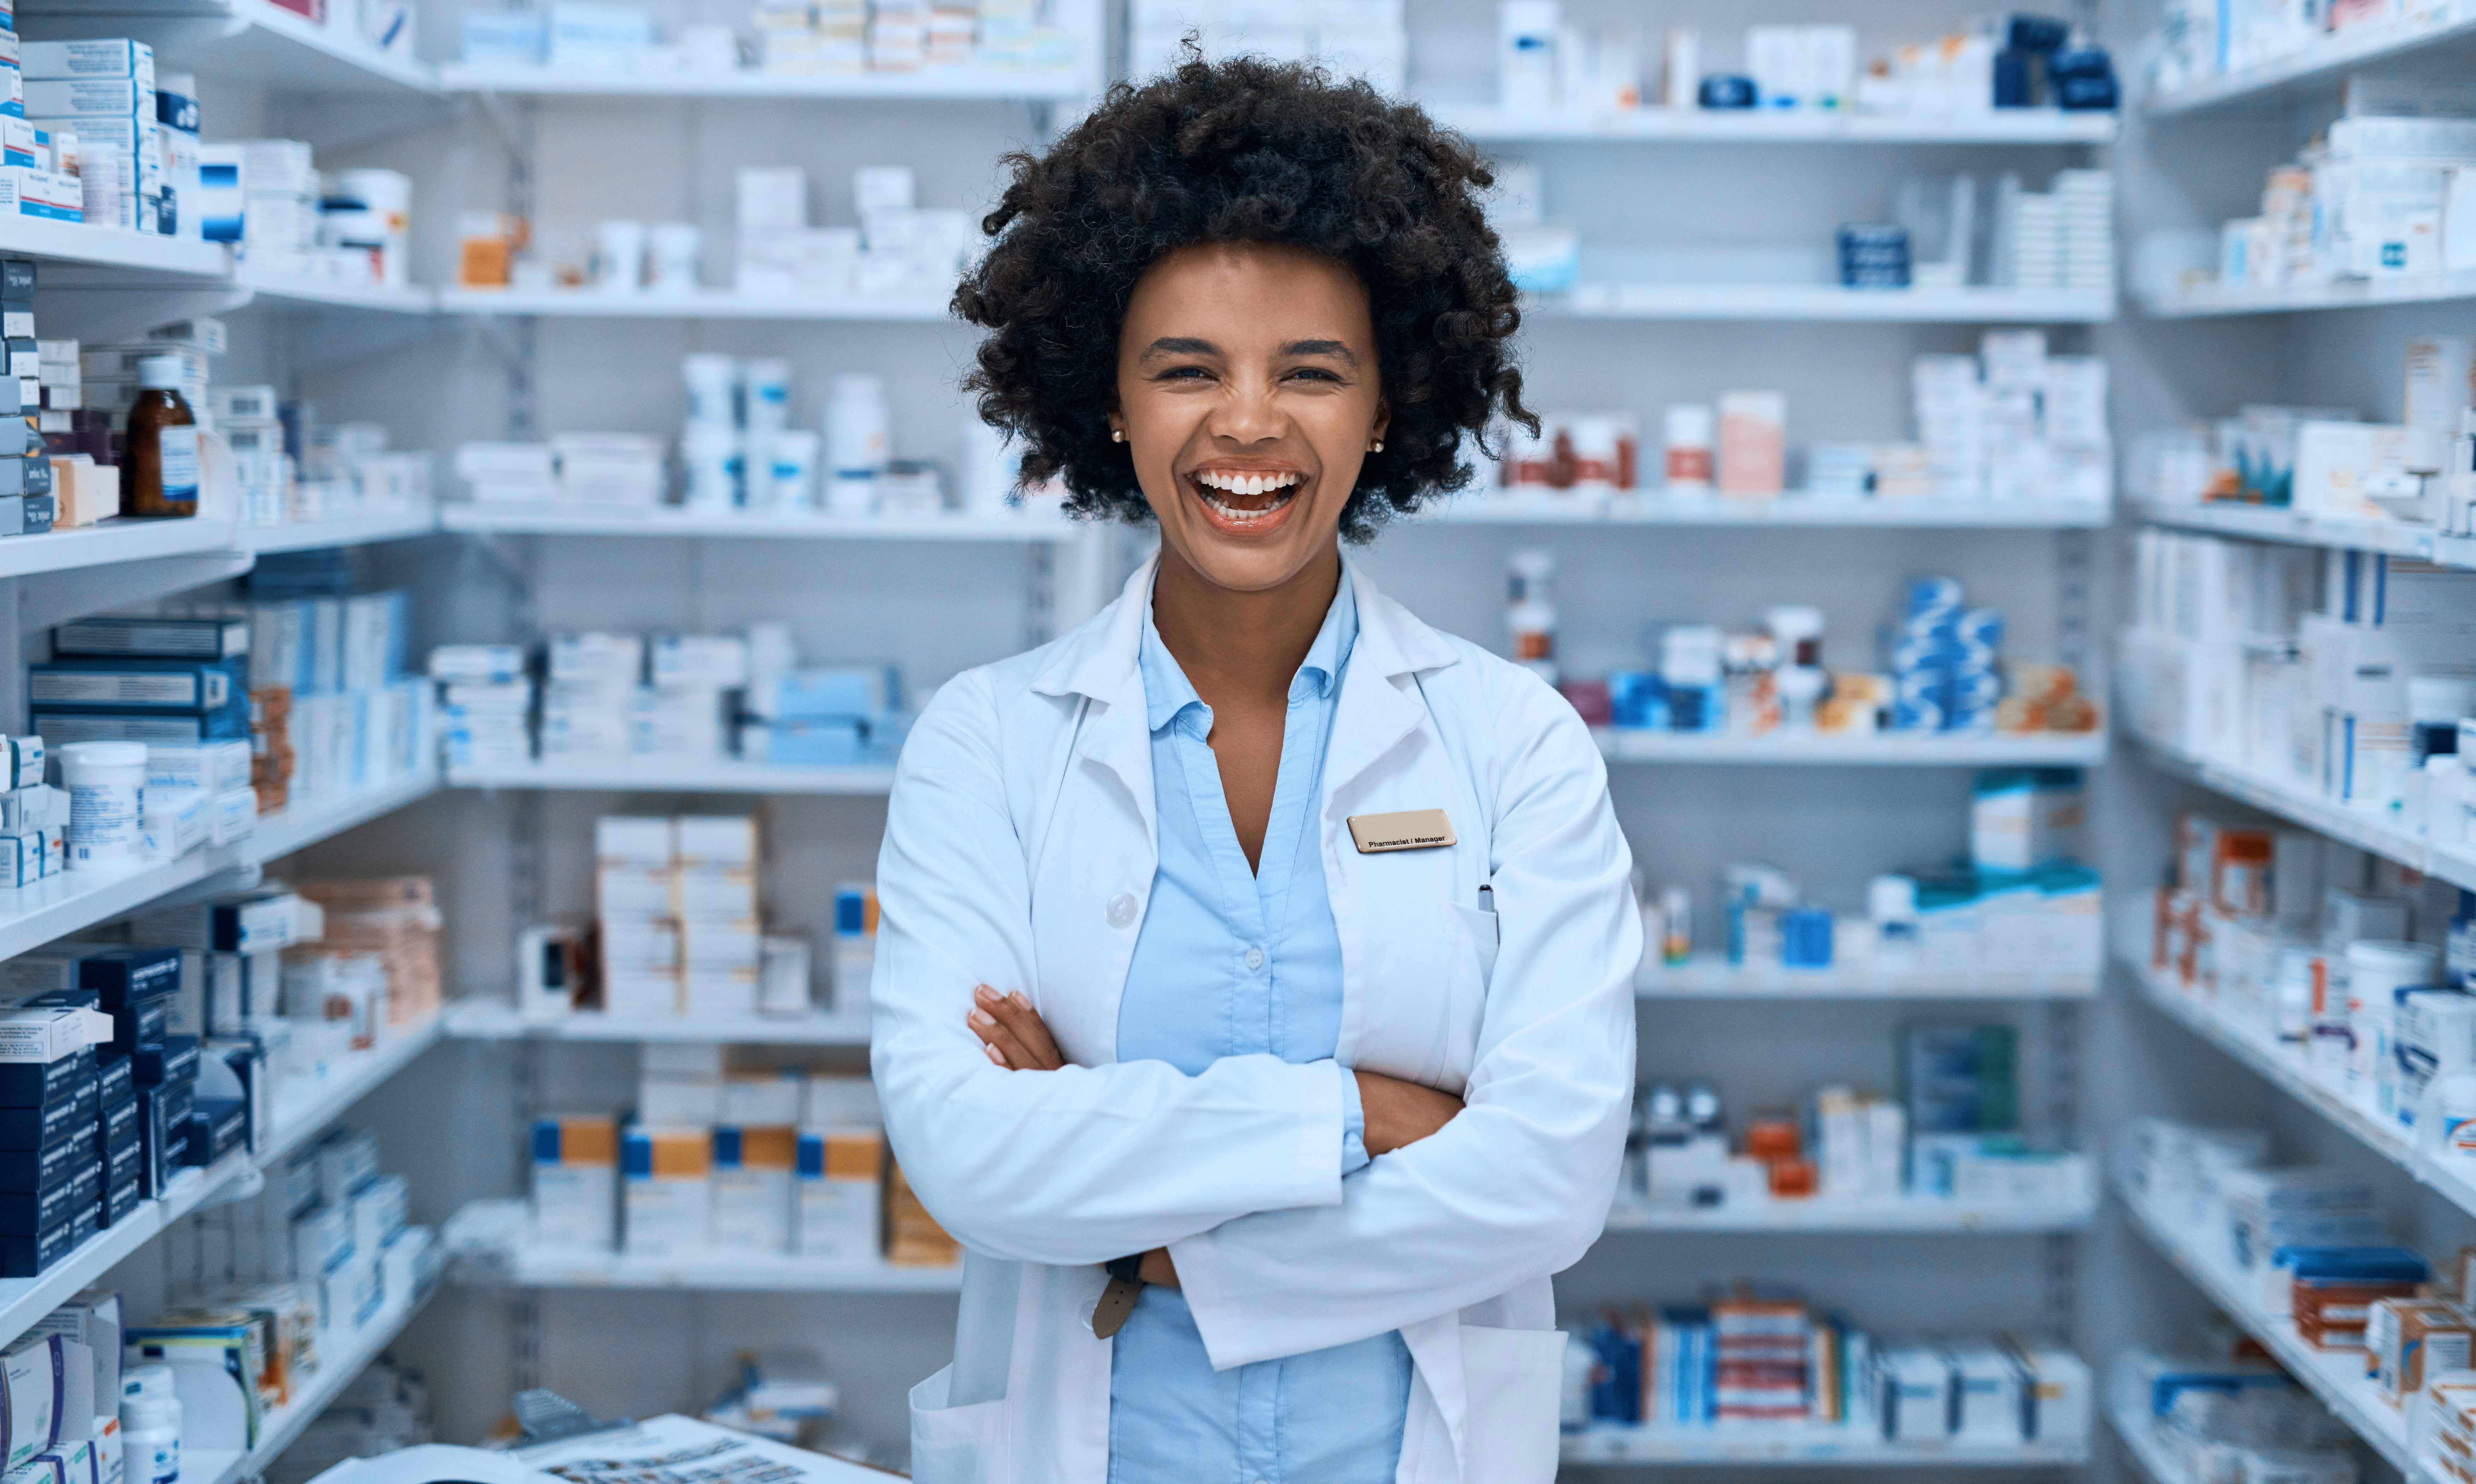 Portrait of a confident young woman working in a pharmacy.